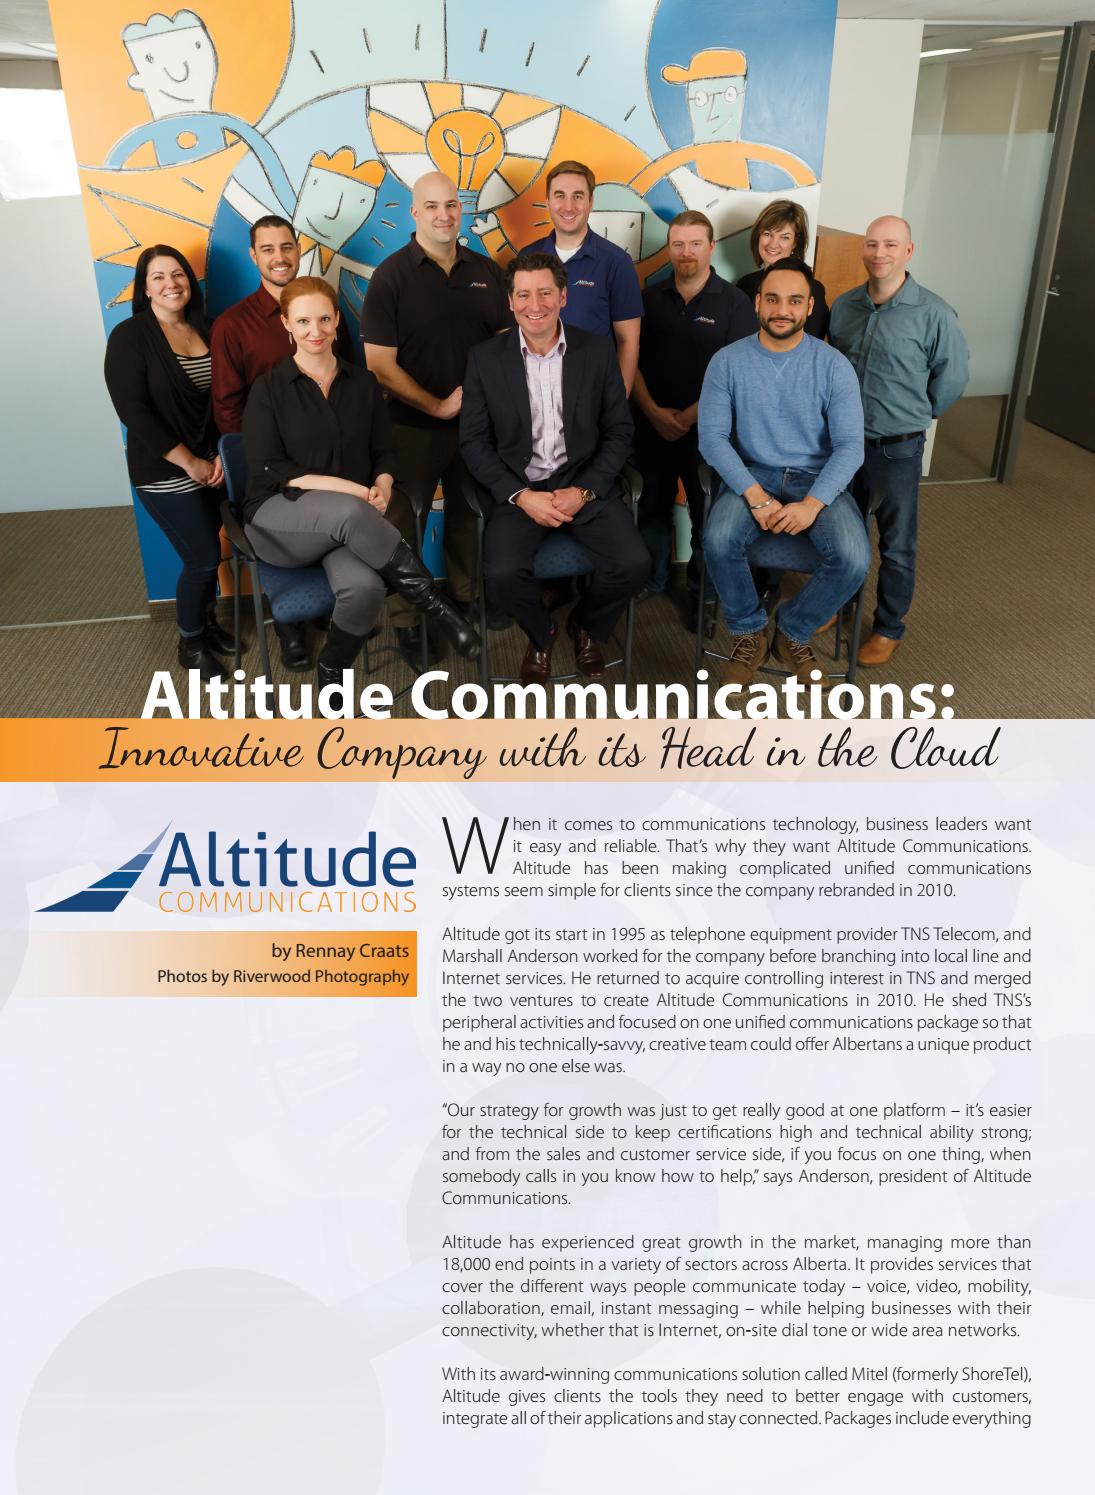 Business in Calgary Magazine - Business Profile for Altitude Communications